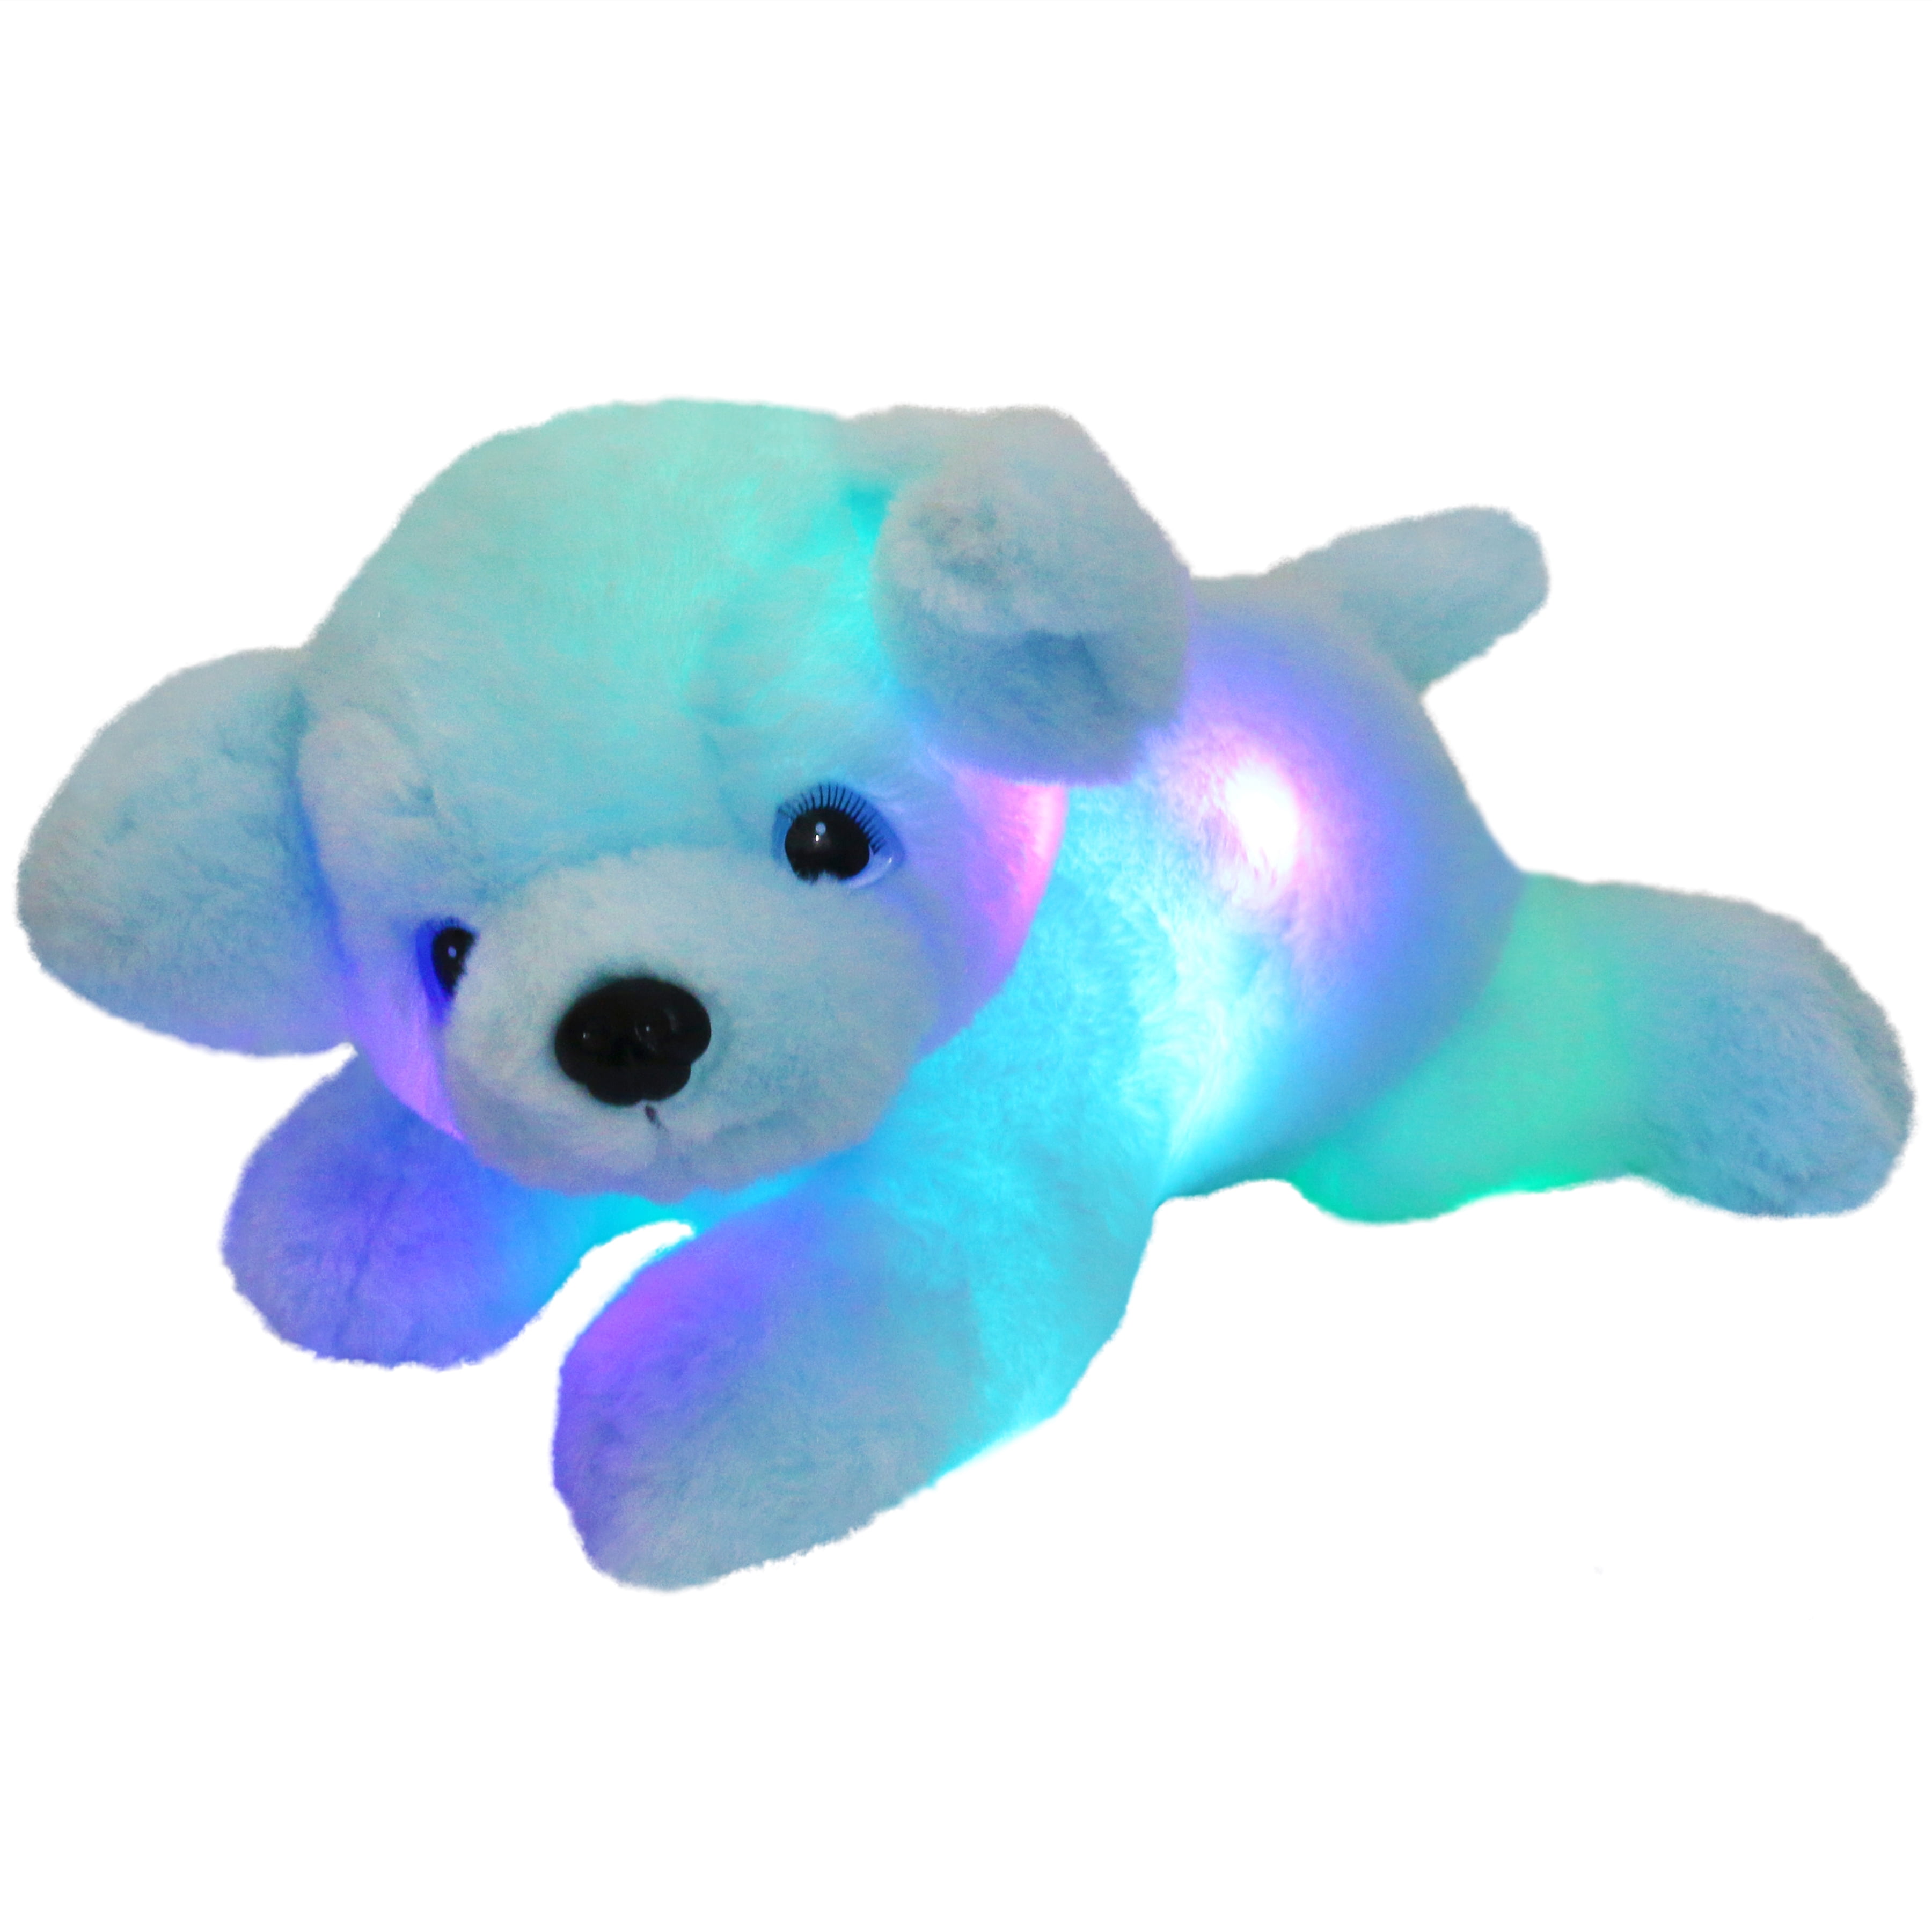 Glow Guards 15'' Pink Light up Musical Puppy Dog Stuffed Animal Soft Plush Toy Pillow with LED Night Lights Lullaby Singing Glow Bedtime Pal Birthday Children's Day Gifts for Toddler Kids 